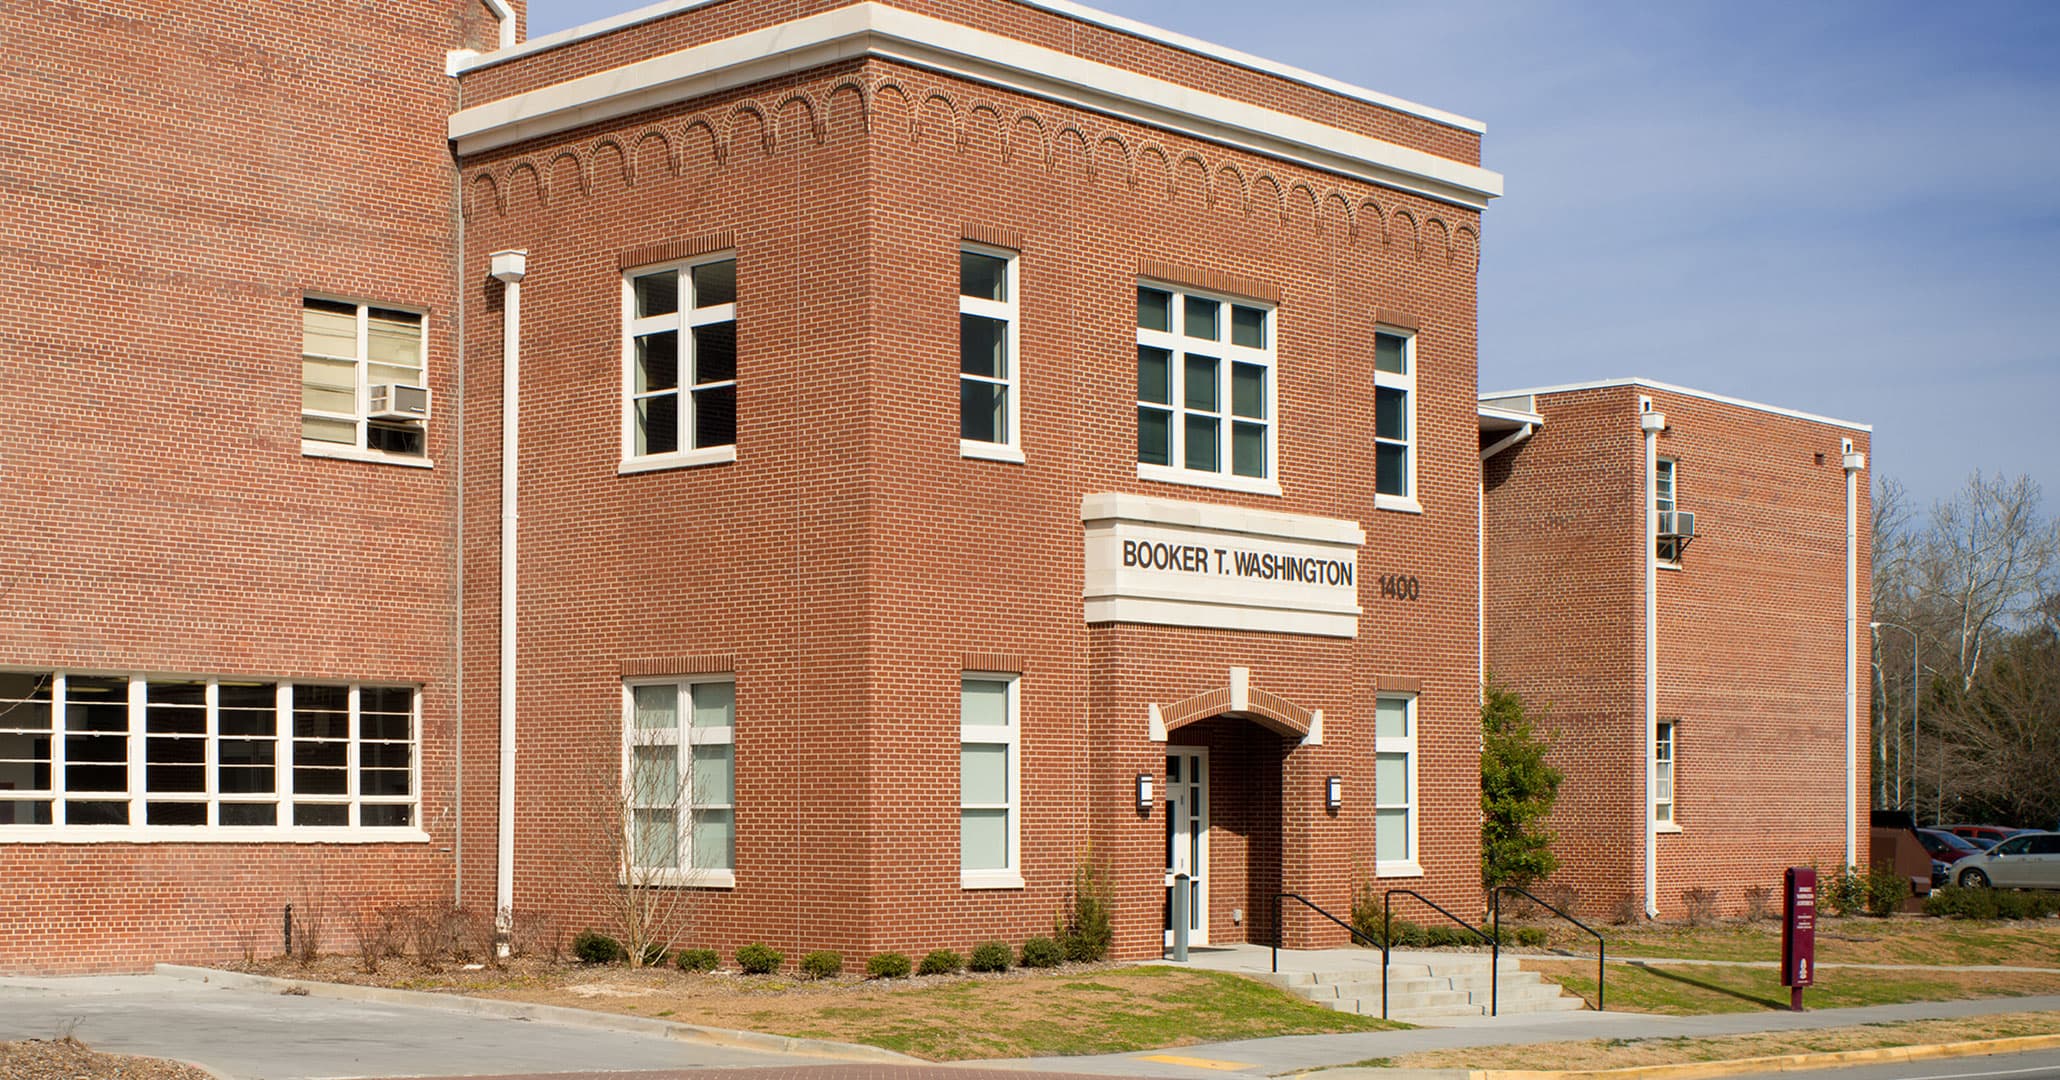 Boudreaux in Columbia, SC worked closely with black neighborhoods to design the new Booker T Washington Auditorium.